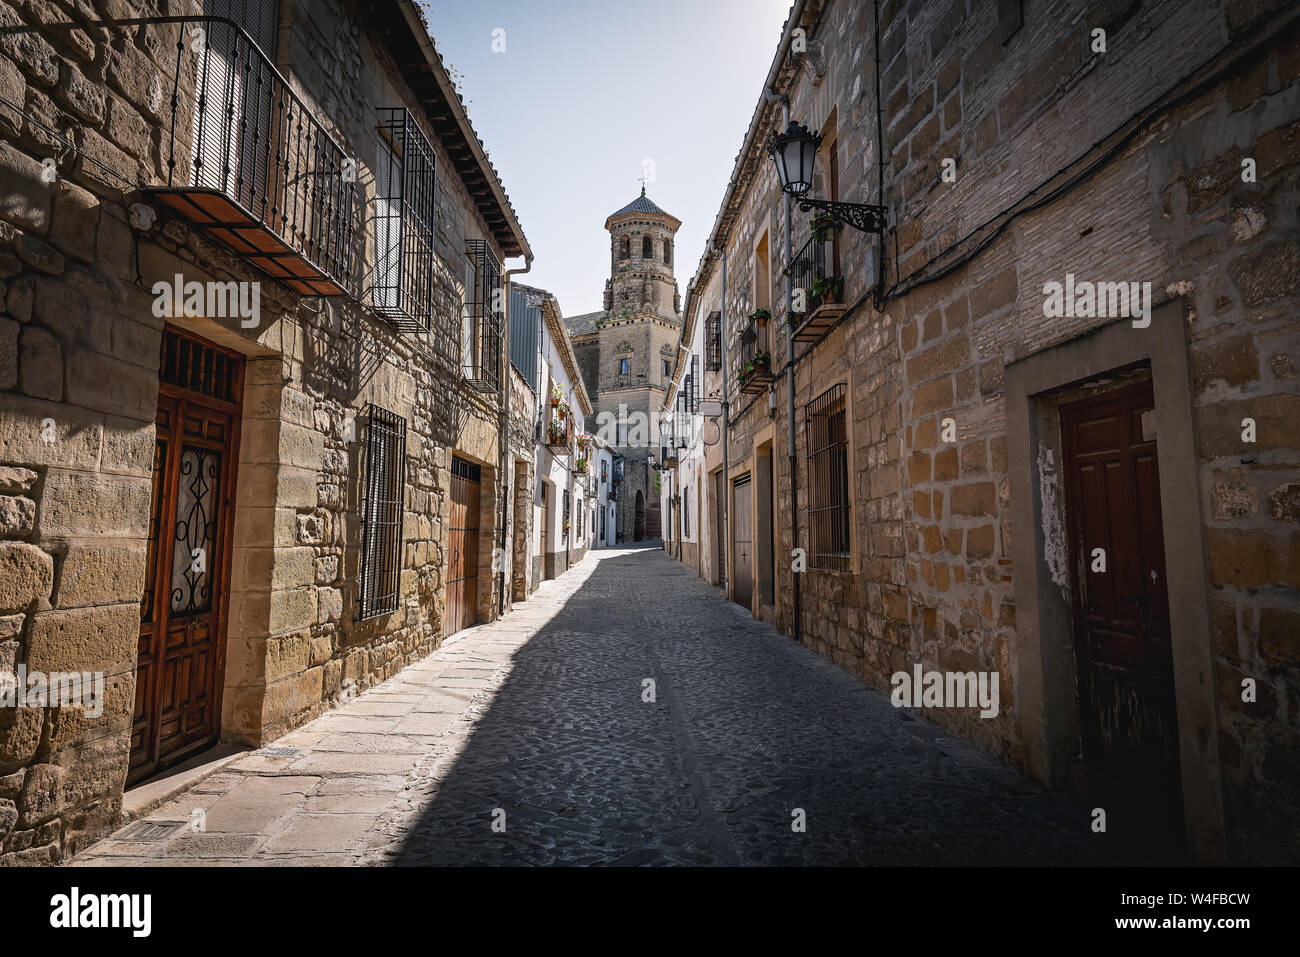 Medieval street of Baeza with old University Tower - Baeza, Jaen Province, Andalusia, Spain Stock Photo